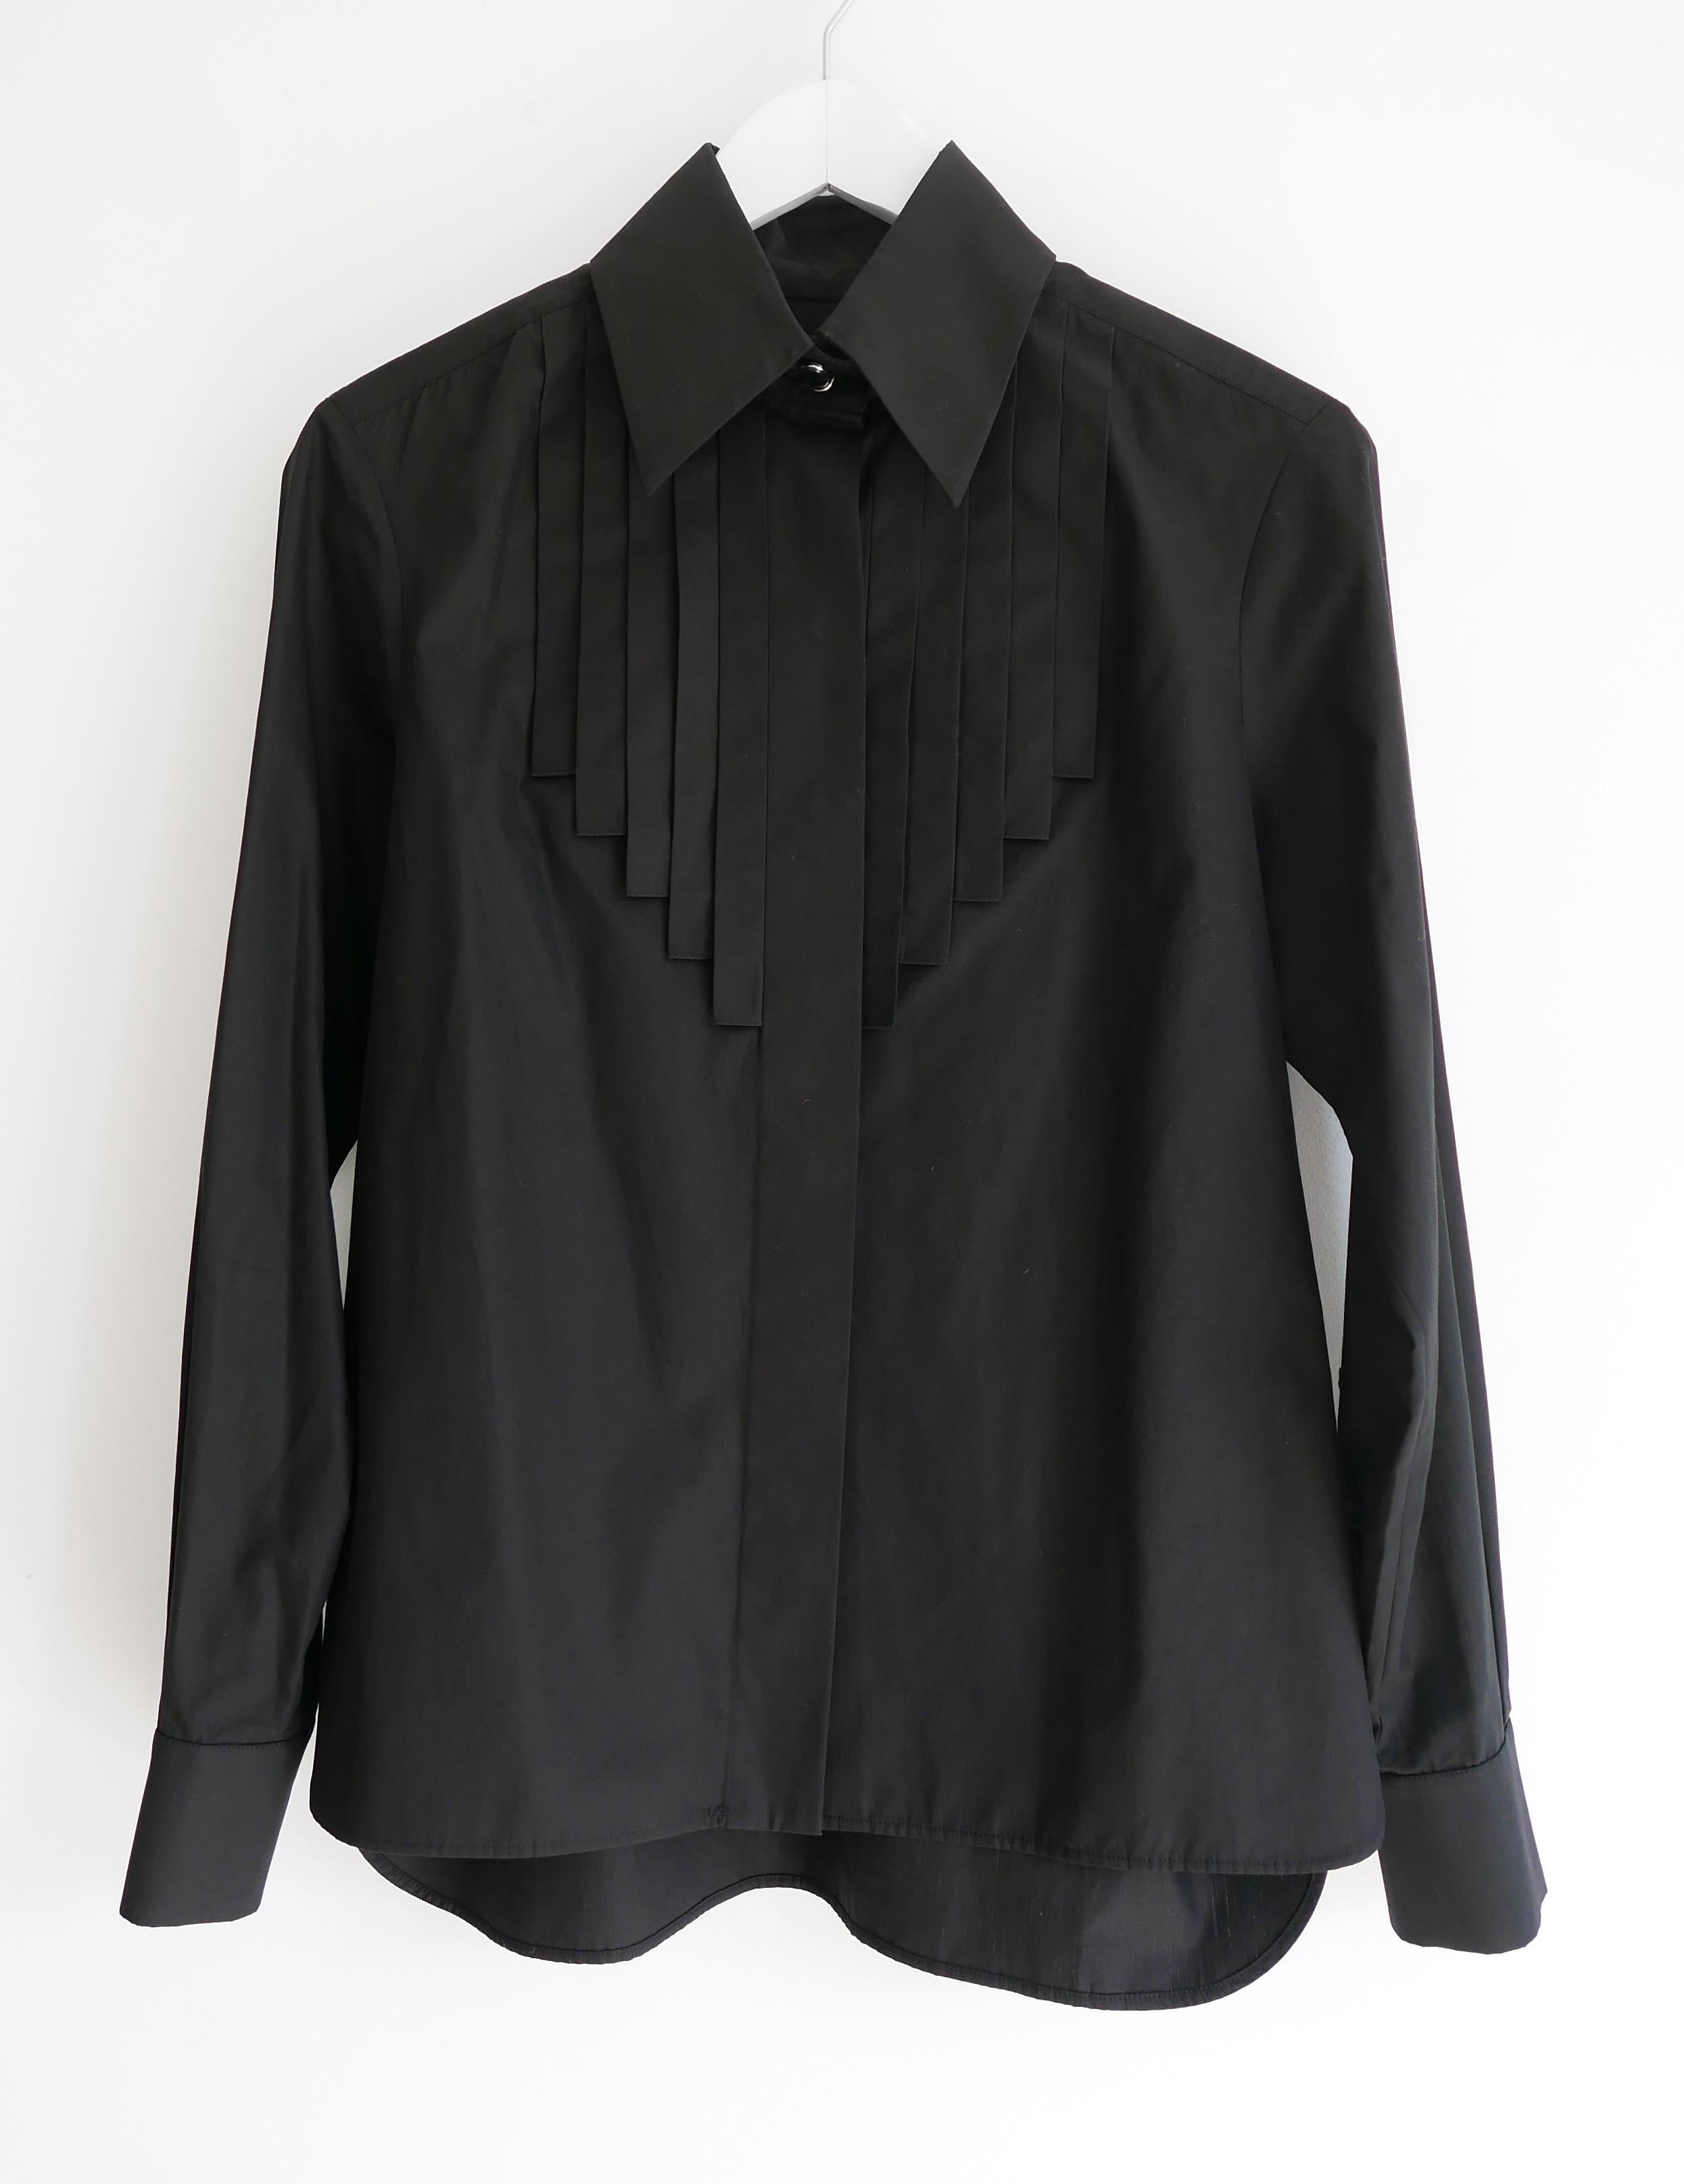 Chanel AW07 Black Tuxedo Shirt w/Bow Tie In New Condition For Sale In London, GB